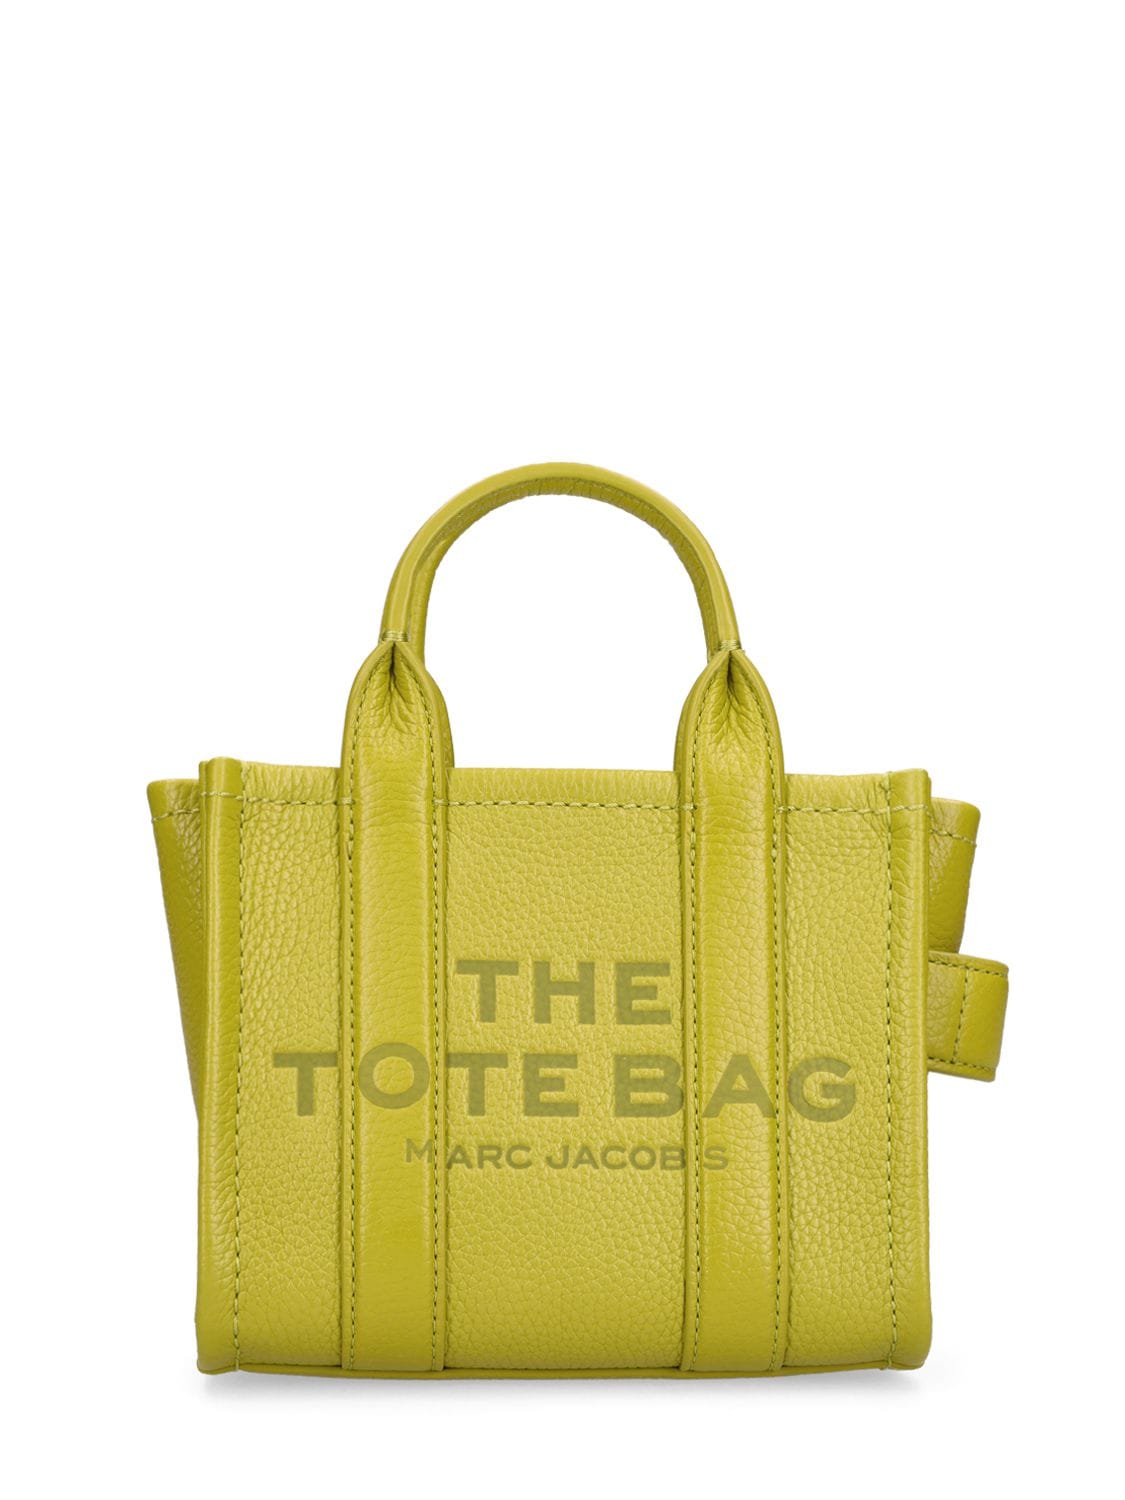 Marc Jacobs The Leather Micro Tote In Citronelle